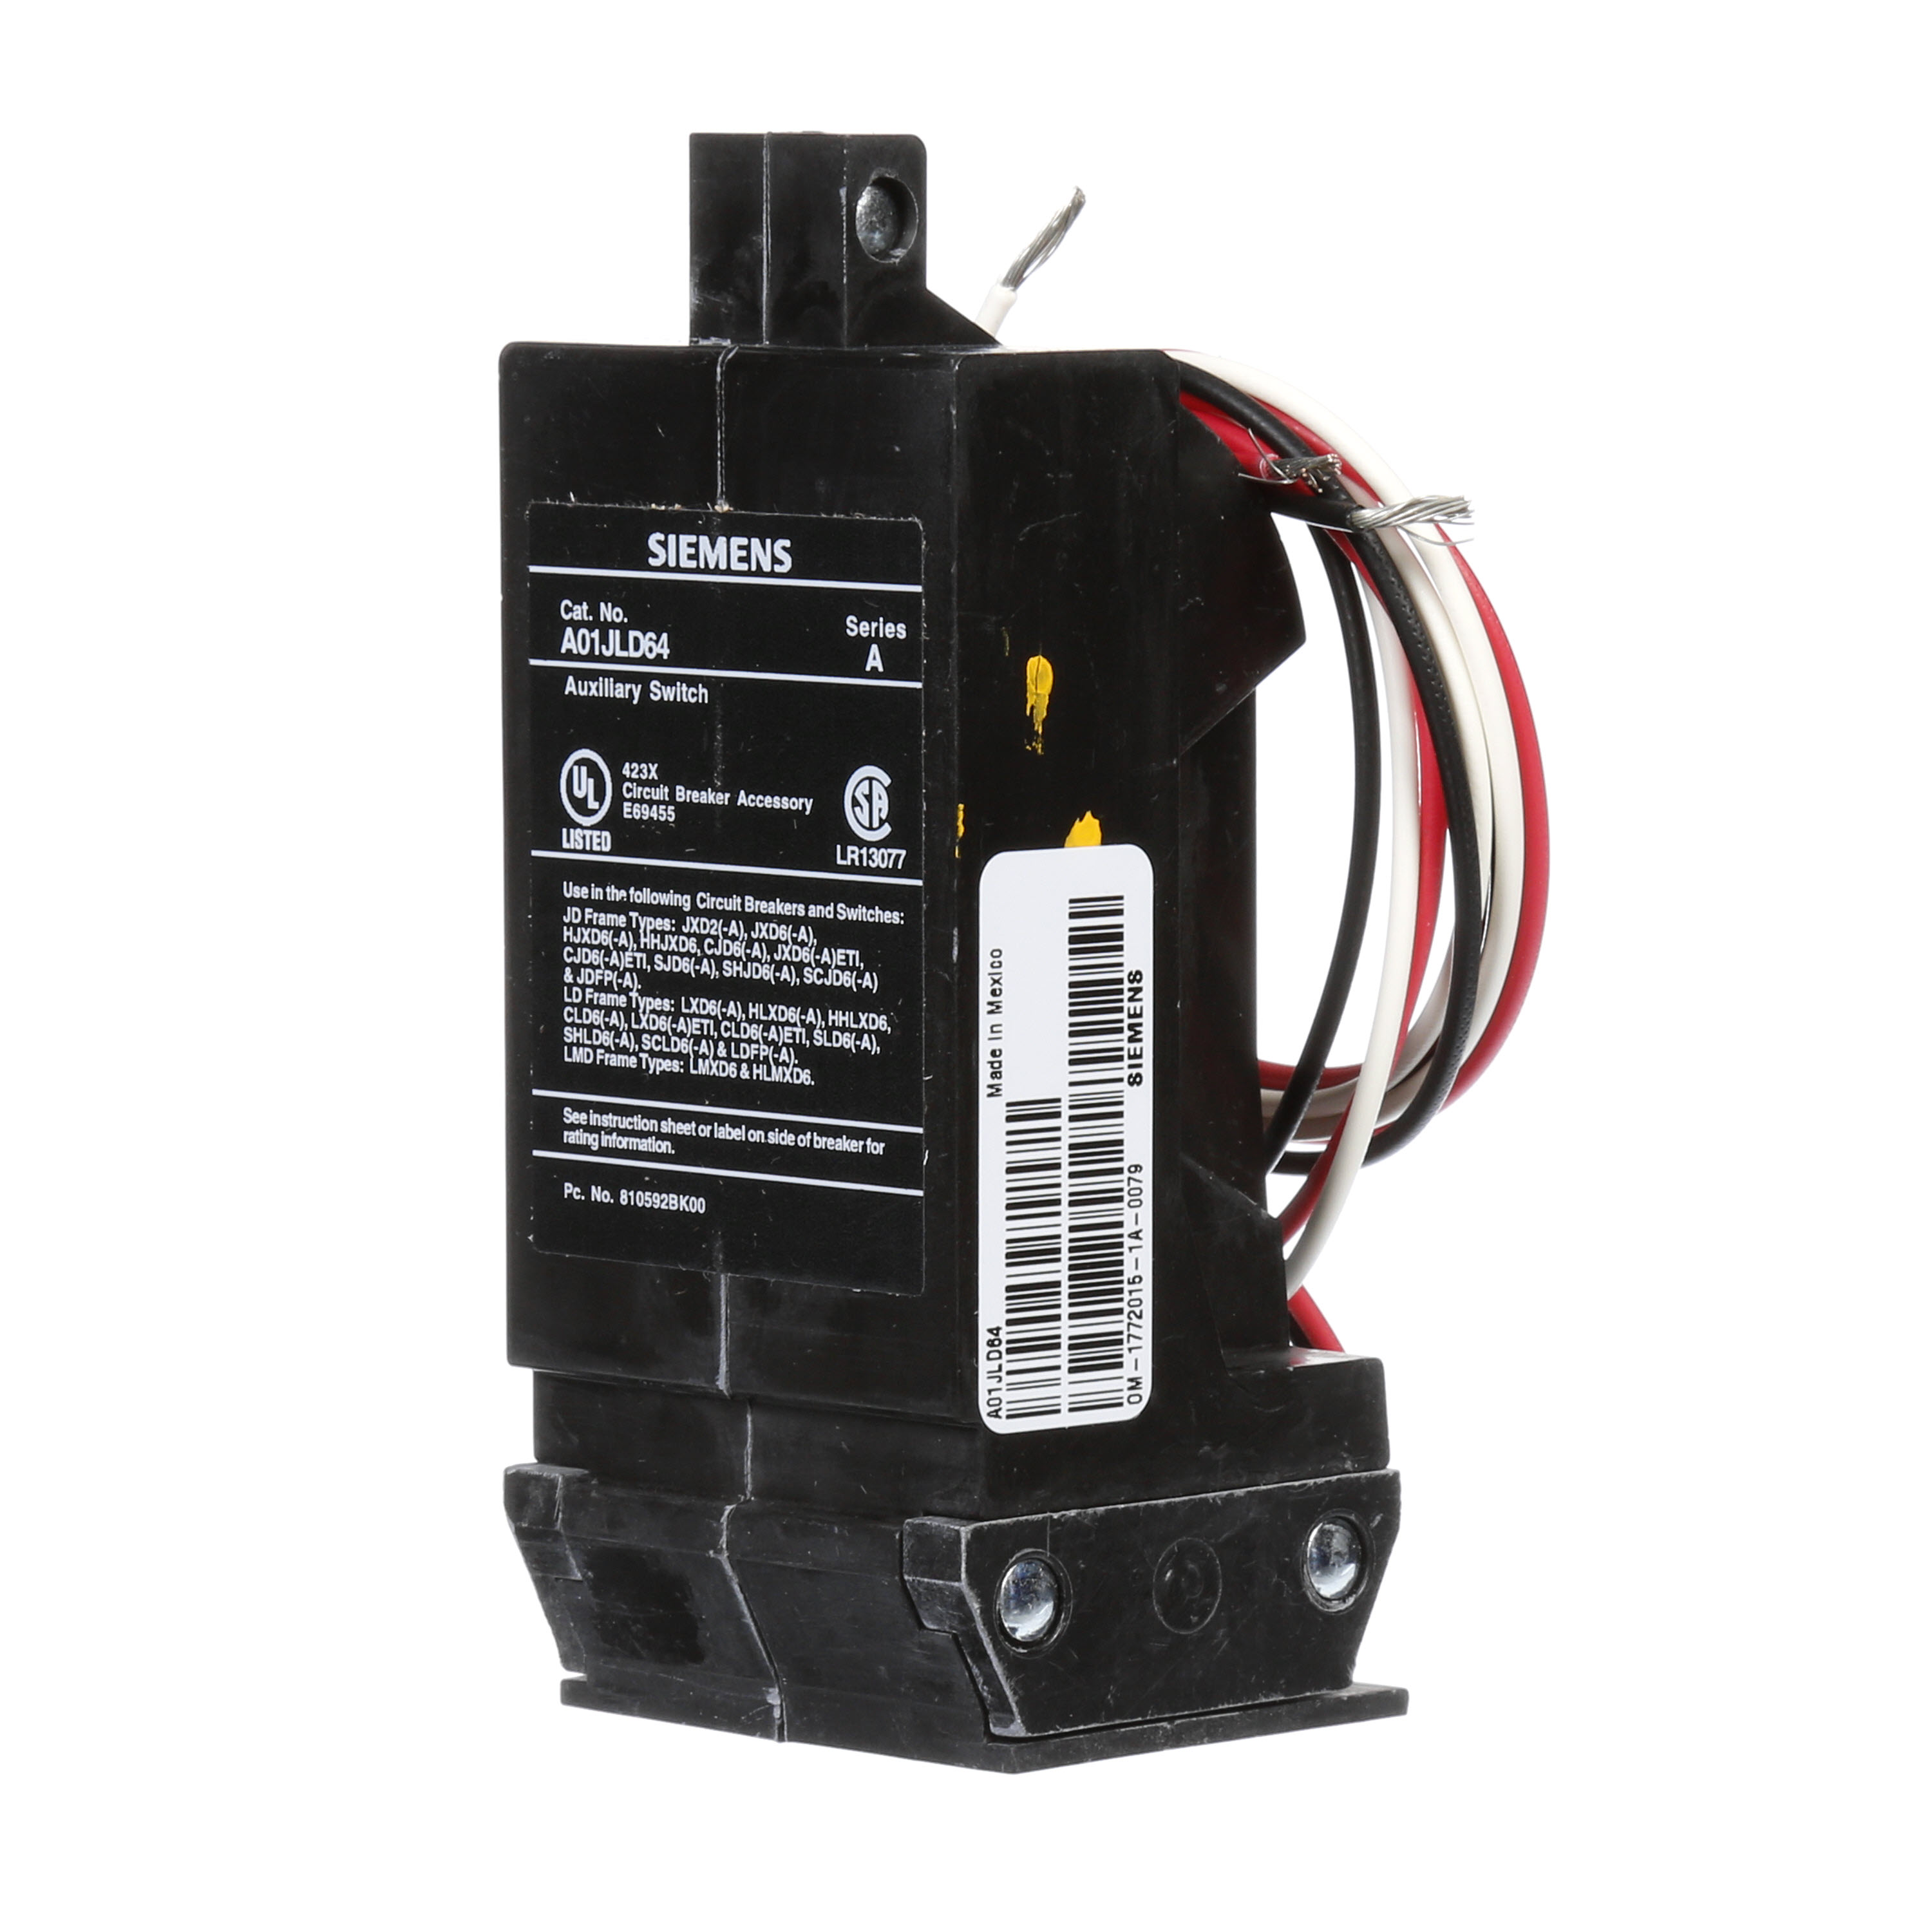 SIEMENS LOW VOLTAGE SENTRON MOLDED CASE CIRCUIT BREAKER INTERNAL ACCESSORY. FORM C 480 VAC AUXILIARY SWITCH (1NO / 1NC). SUITS JD / LD / LMD FRAME BREAKERS.